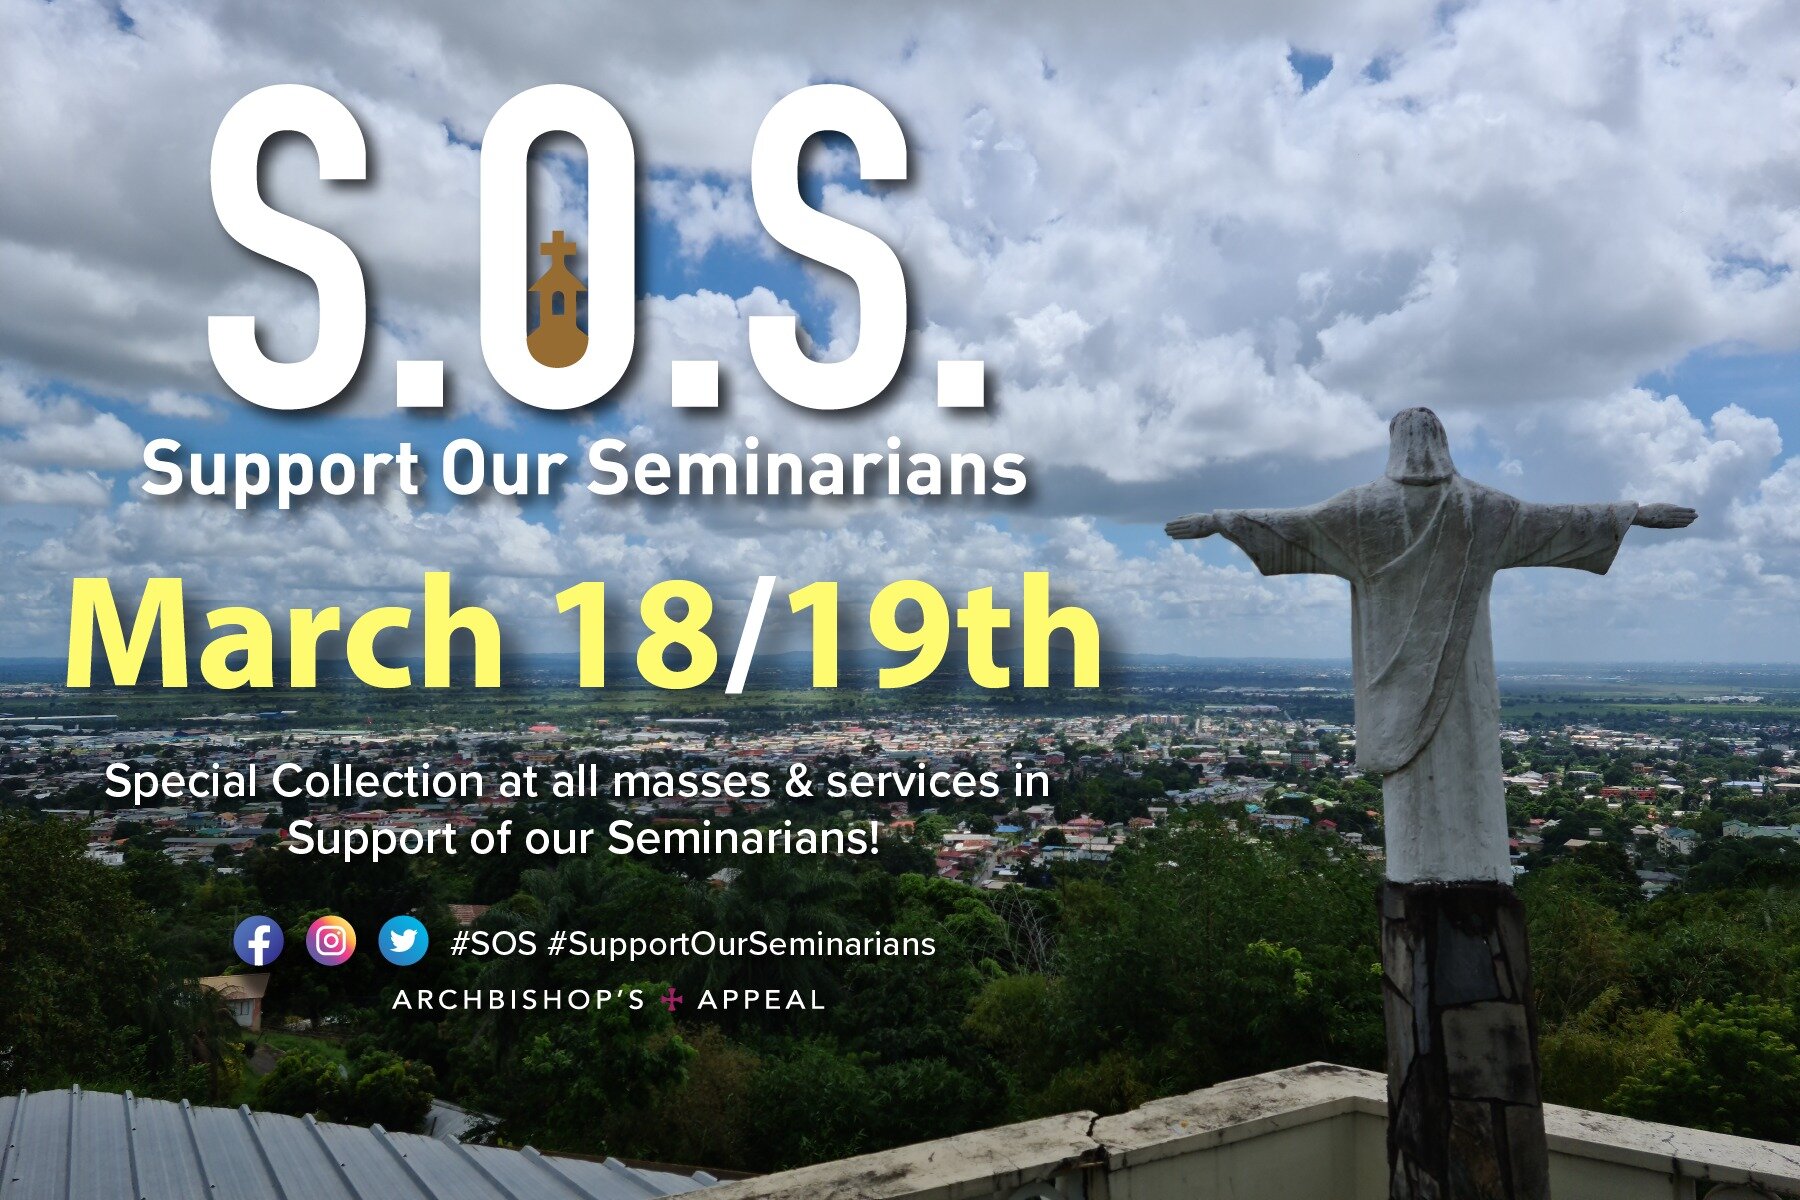 Only 10 days away! ⏱

Help show you support to those in our nation who have answered the call and pledged to become the future shepherds of our church!

There will be a special collection in all parishes during the 4th weekend of Lent (March 18th &am